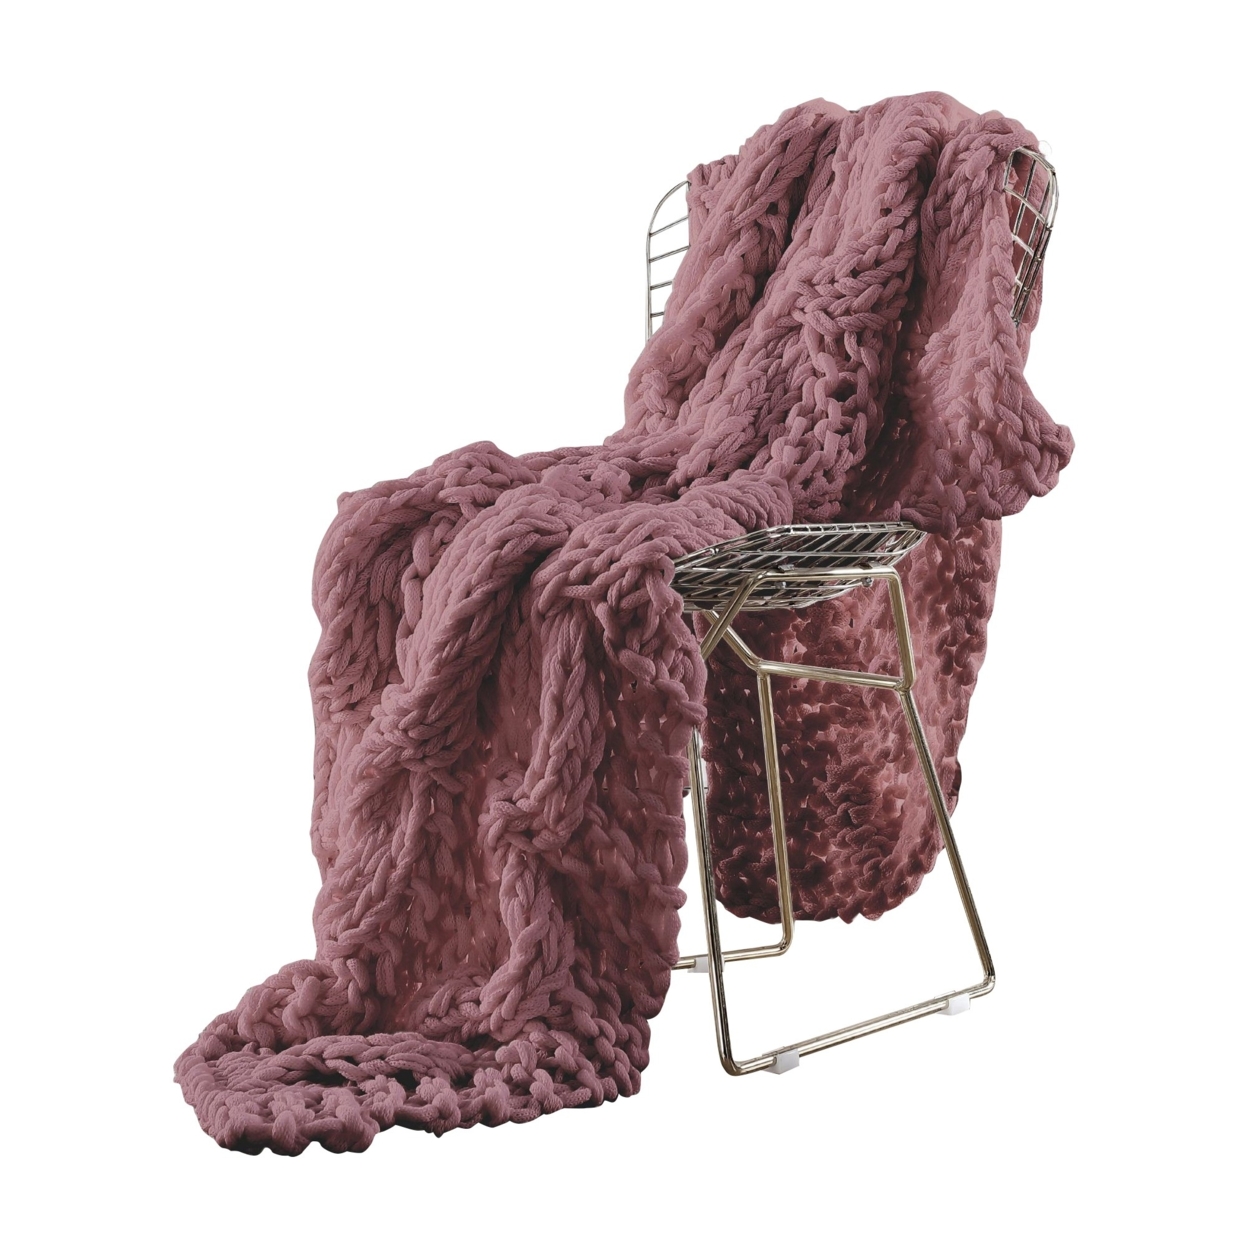 Veria Throw Blanket With Hand Knitted Acrylic Fabric The Urban Port, Red- Saltoro Sherpi